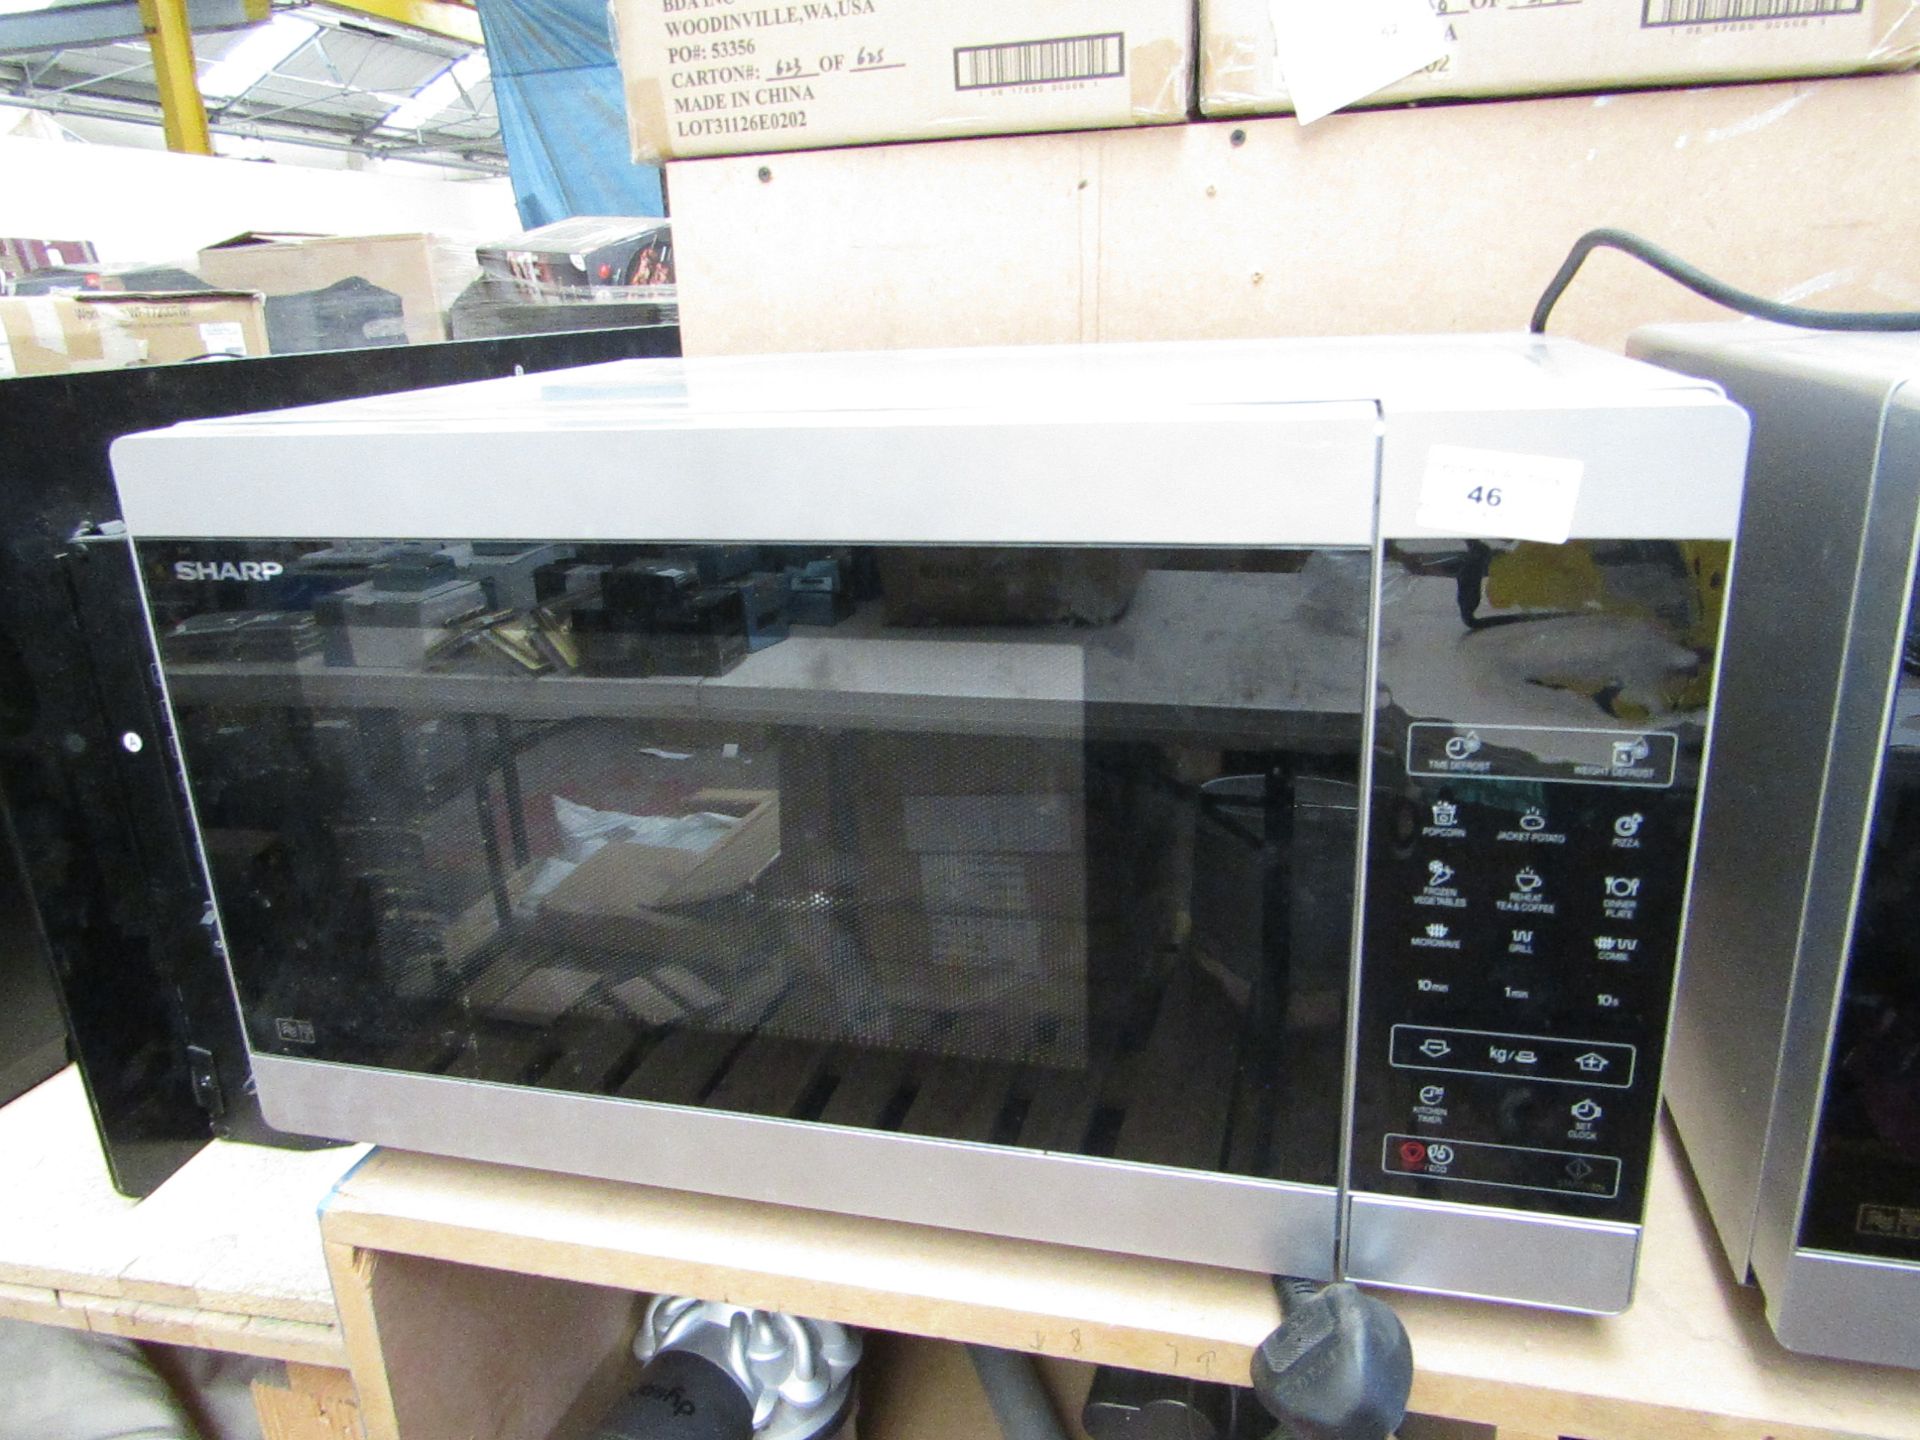 Sharp YC-MG81U-S Microwave and grill, tested working on the microwave function as in we heated a